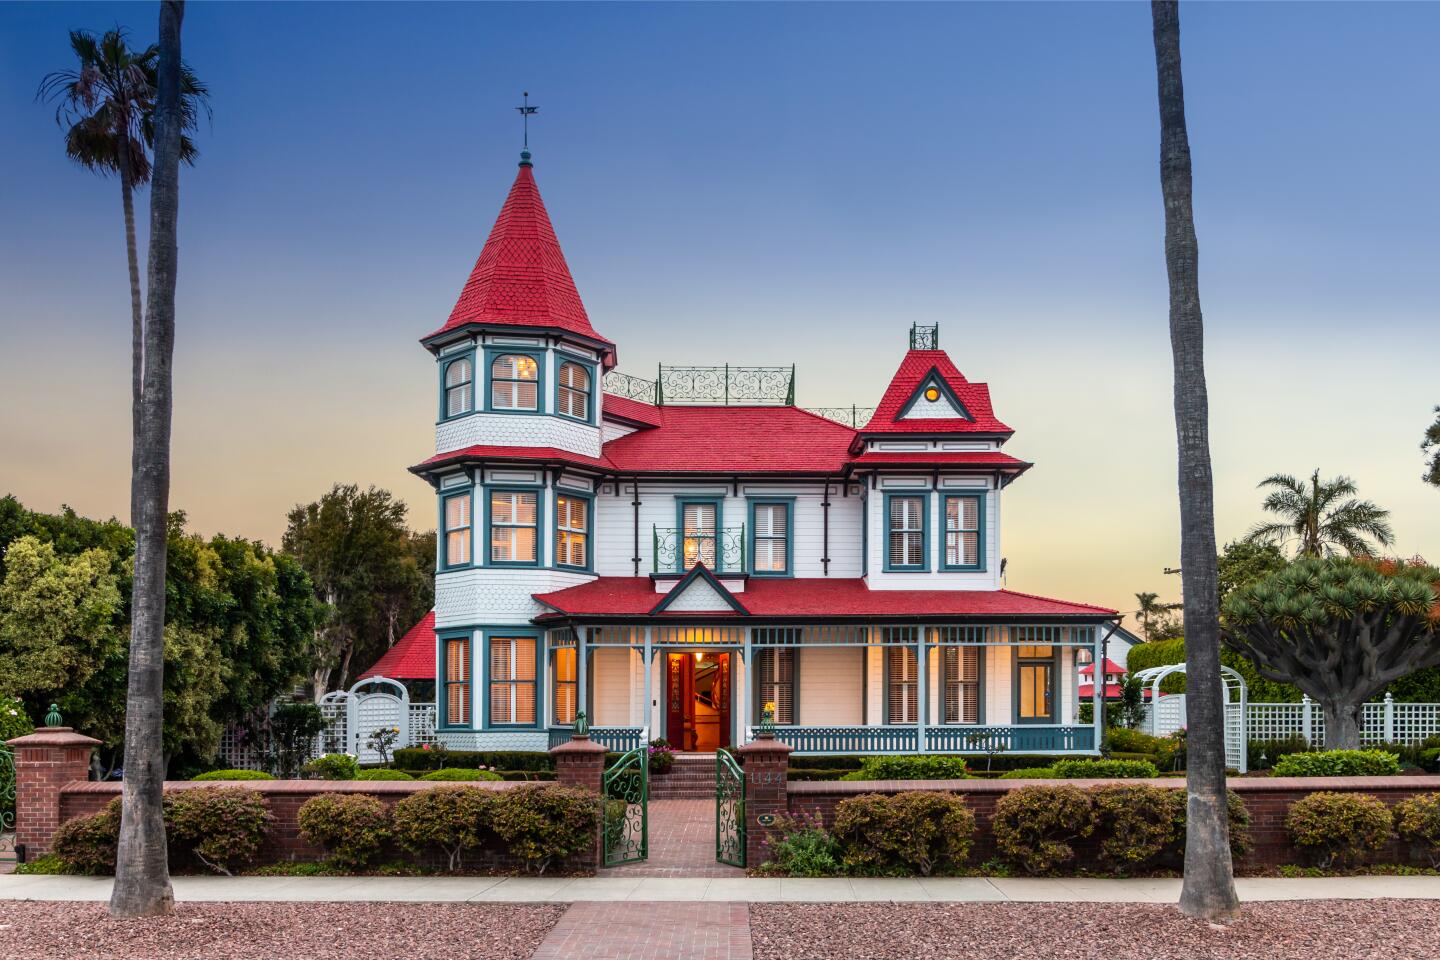 The four-story Victorian.